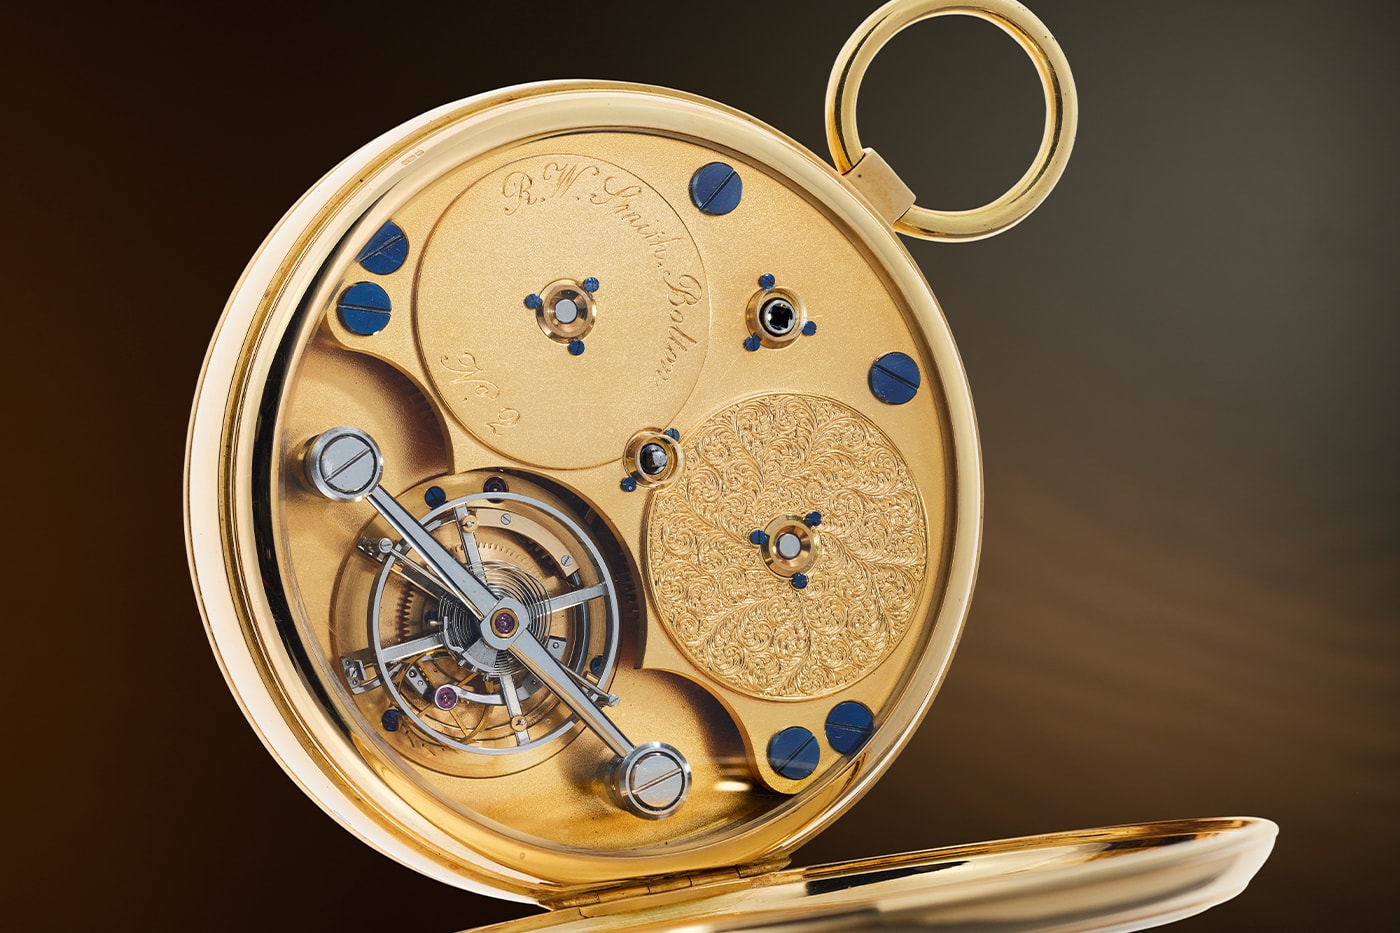 Phillips Roger Smith Pocket Watch Number Two New York Watch Auction: EIGHT